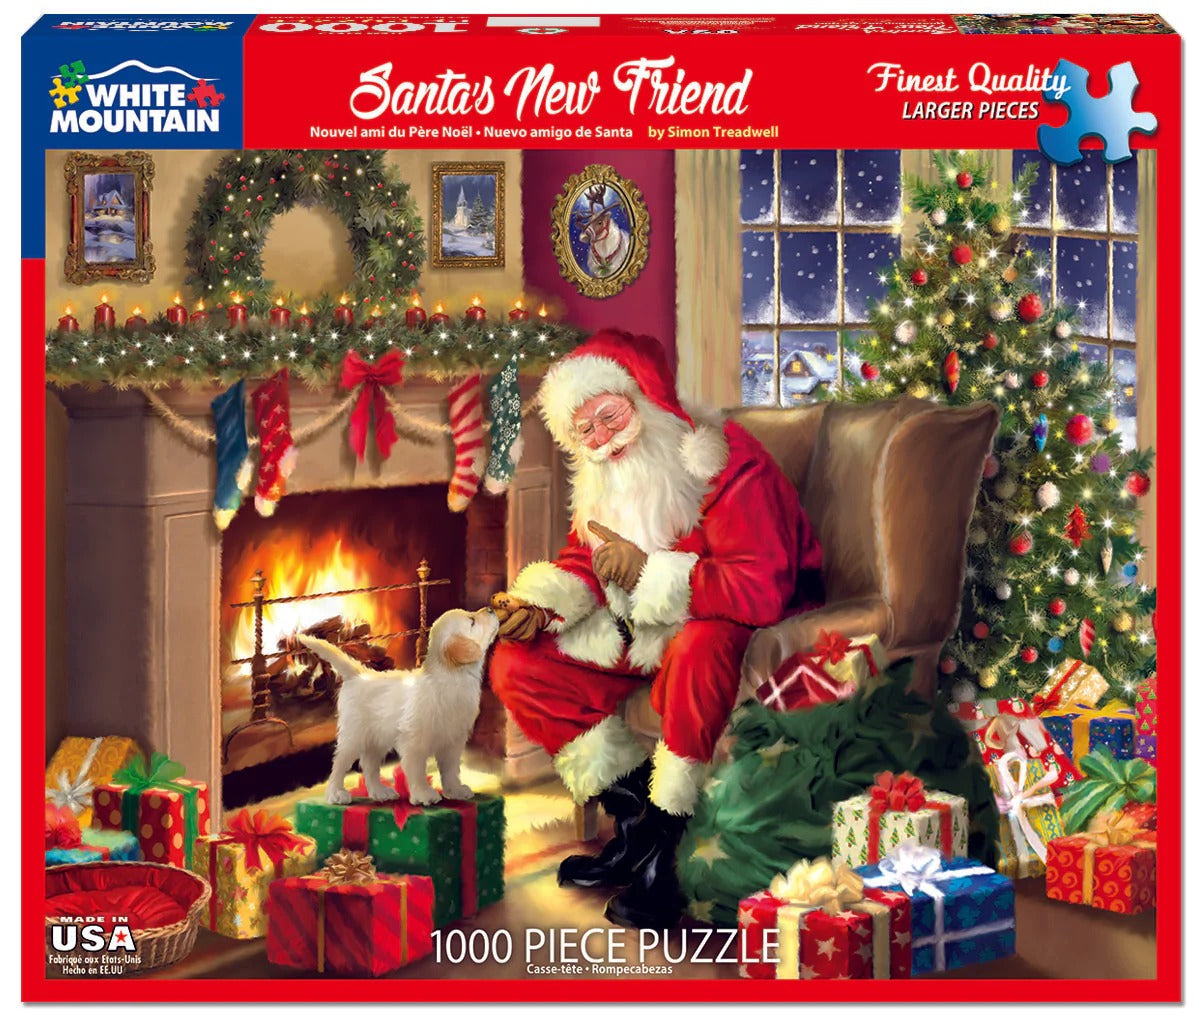 Santa's New Friend 1000 Piece Jigsaw Puzzle by White Mountain Puzzles